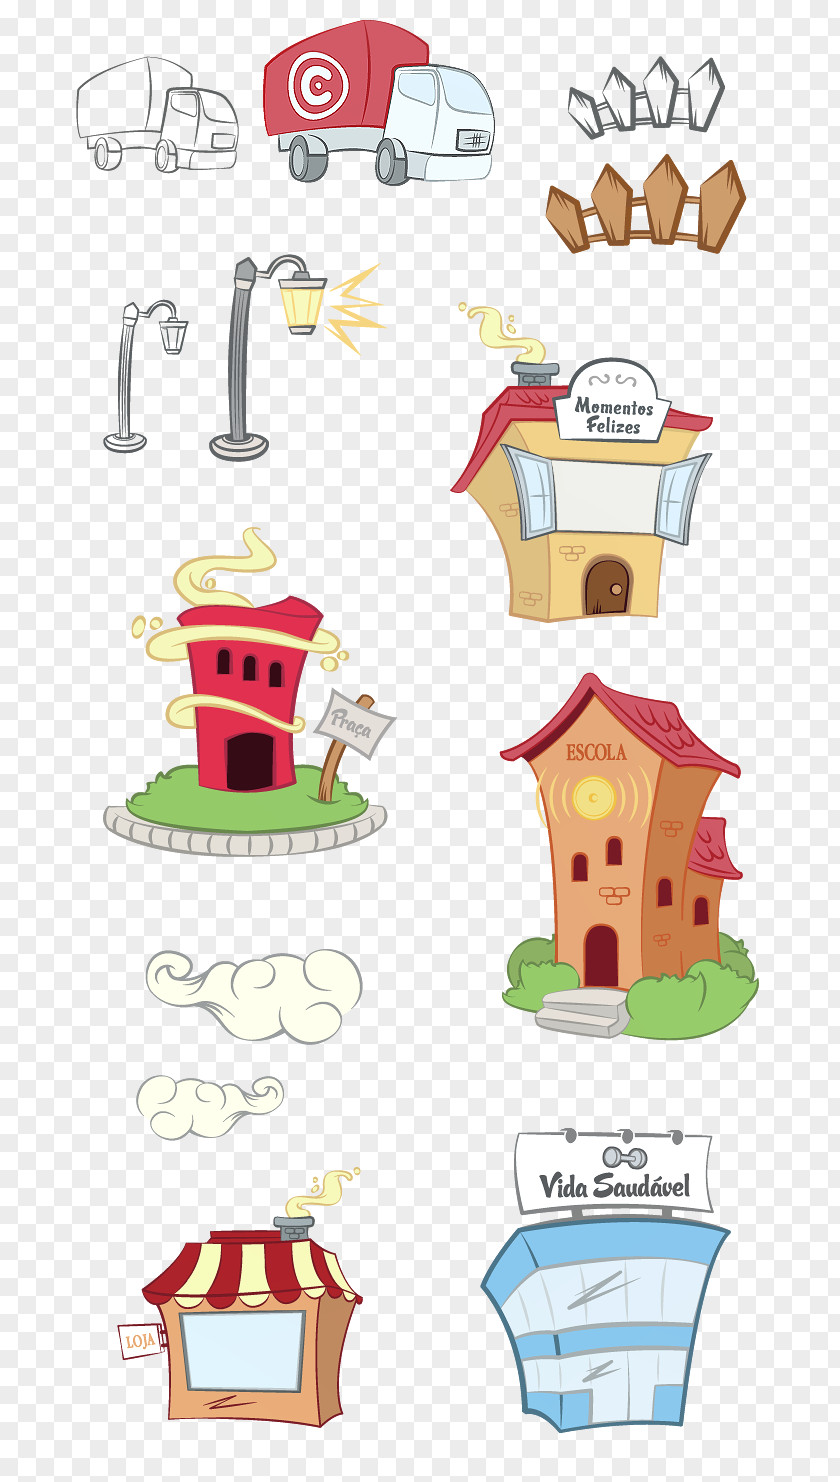 Clip Art Illustration Clothing Accessories Cartoon Product Design PNG